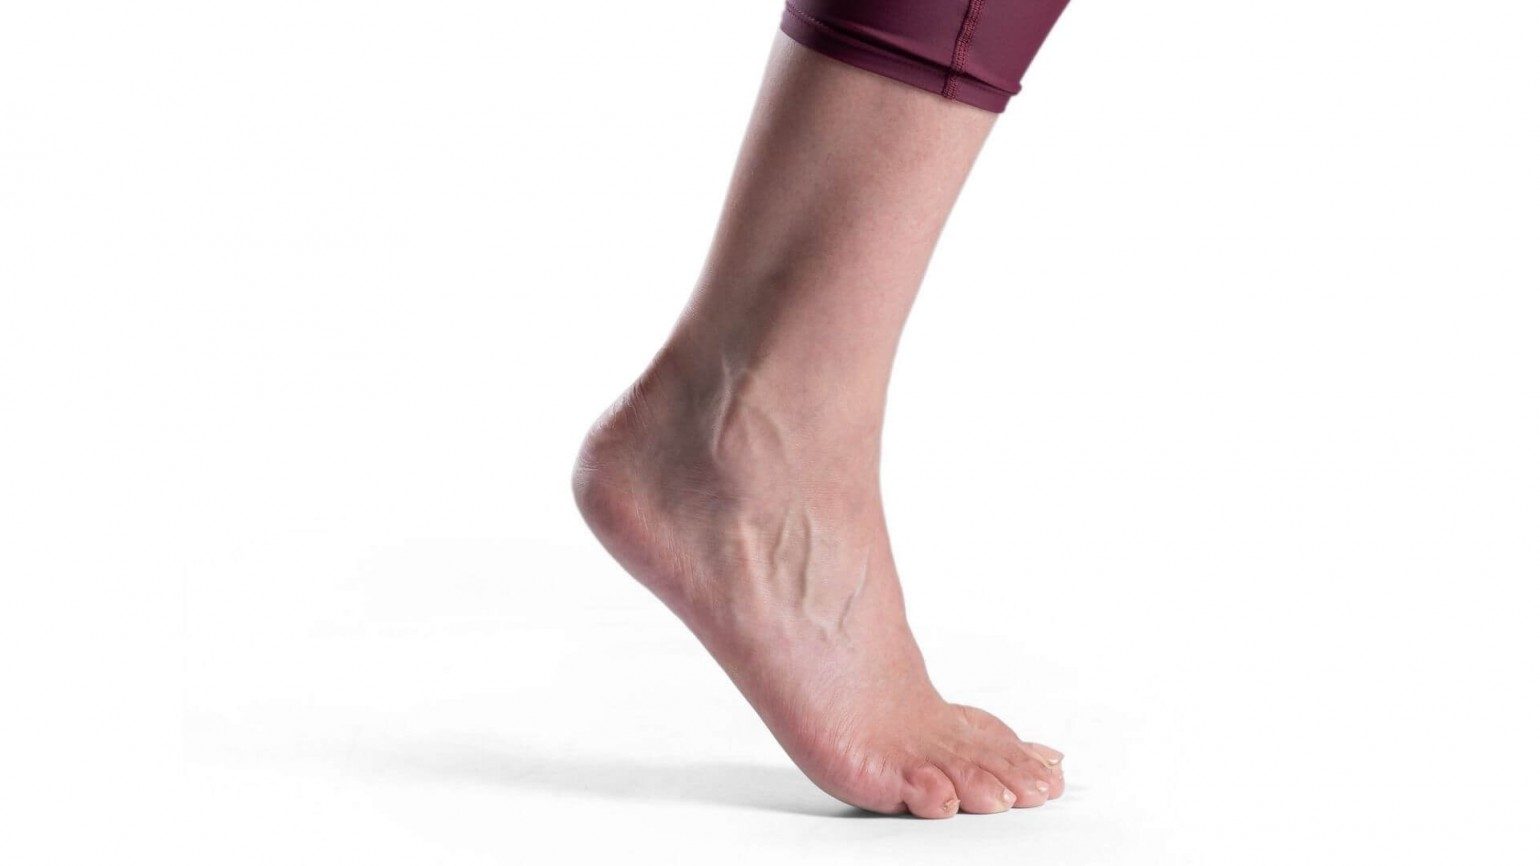 Side view of a white woman's ankle and foot. The ball of her foot is on the ground and the heel is raised in the air. A pair of purple maroon leggings stop just above the ankle